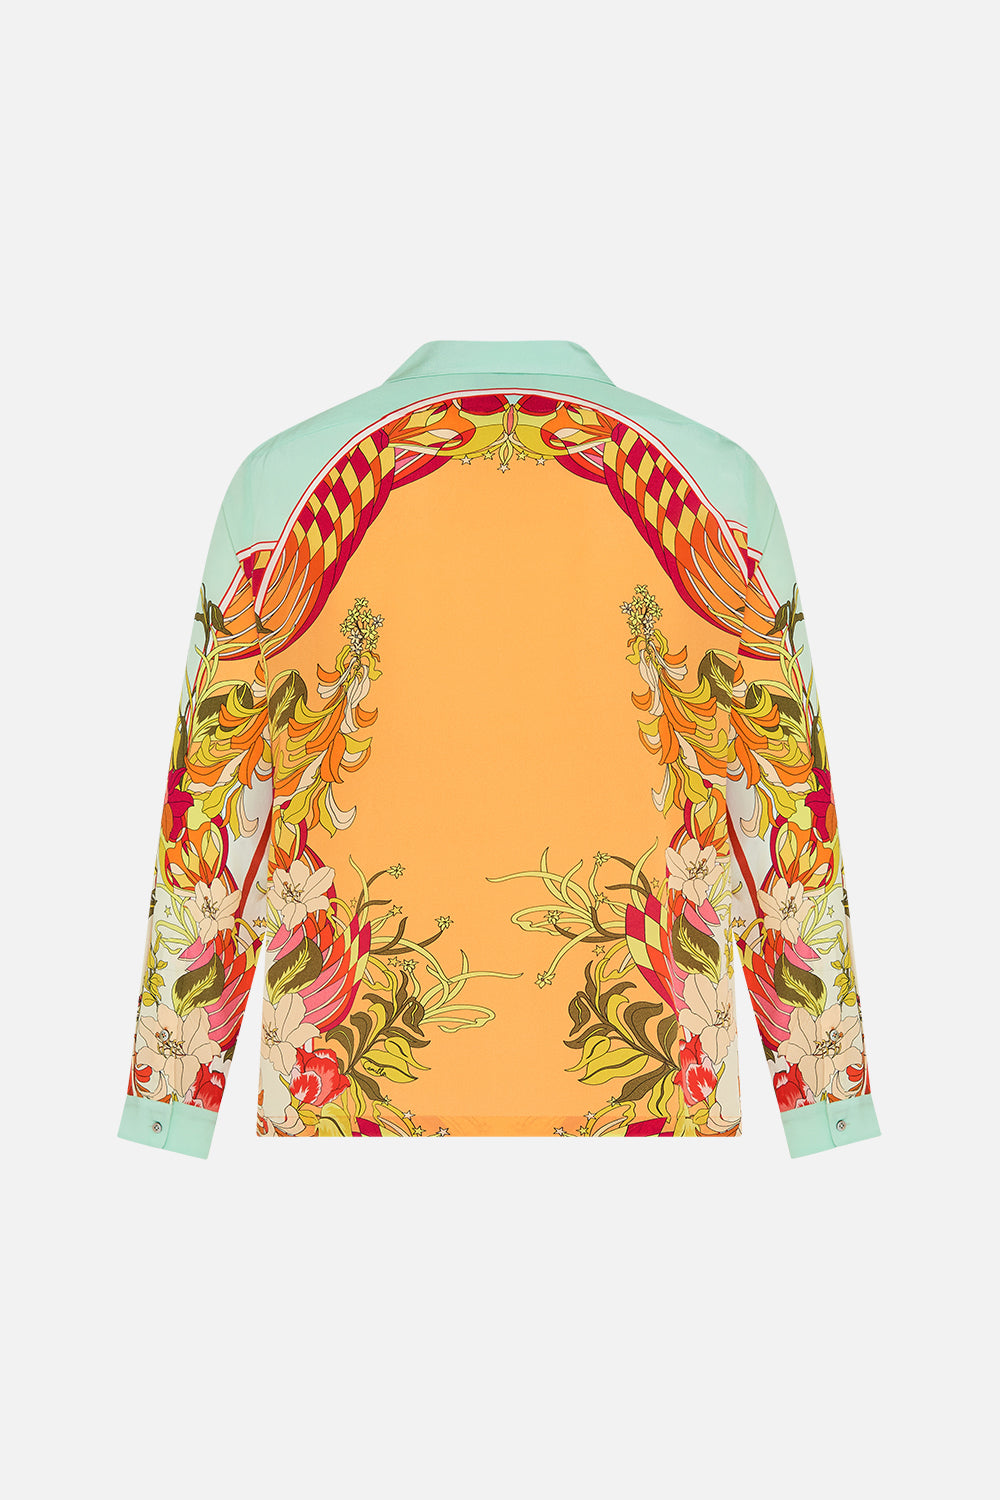 CAMILLA floral long sleeve camp collared shirt in The Flower Child Society